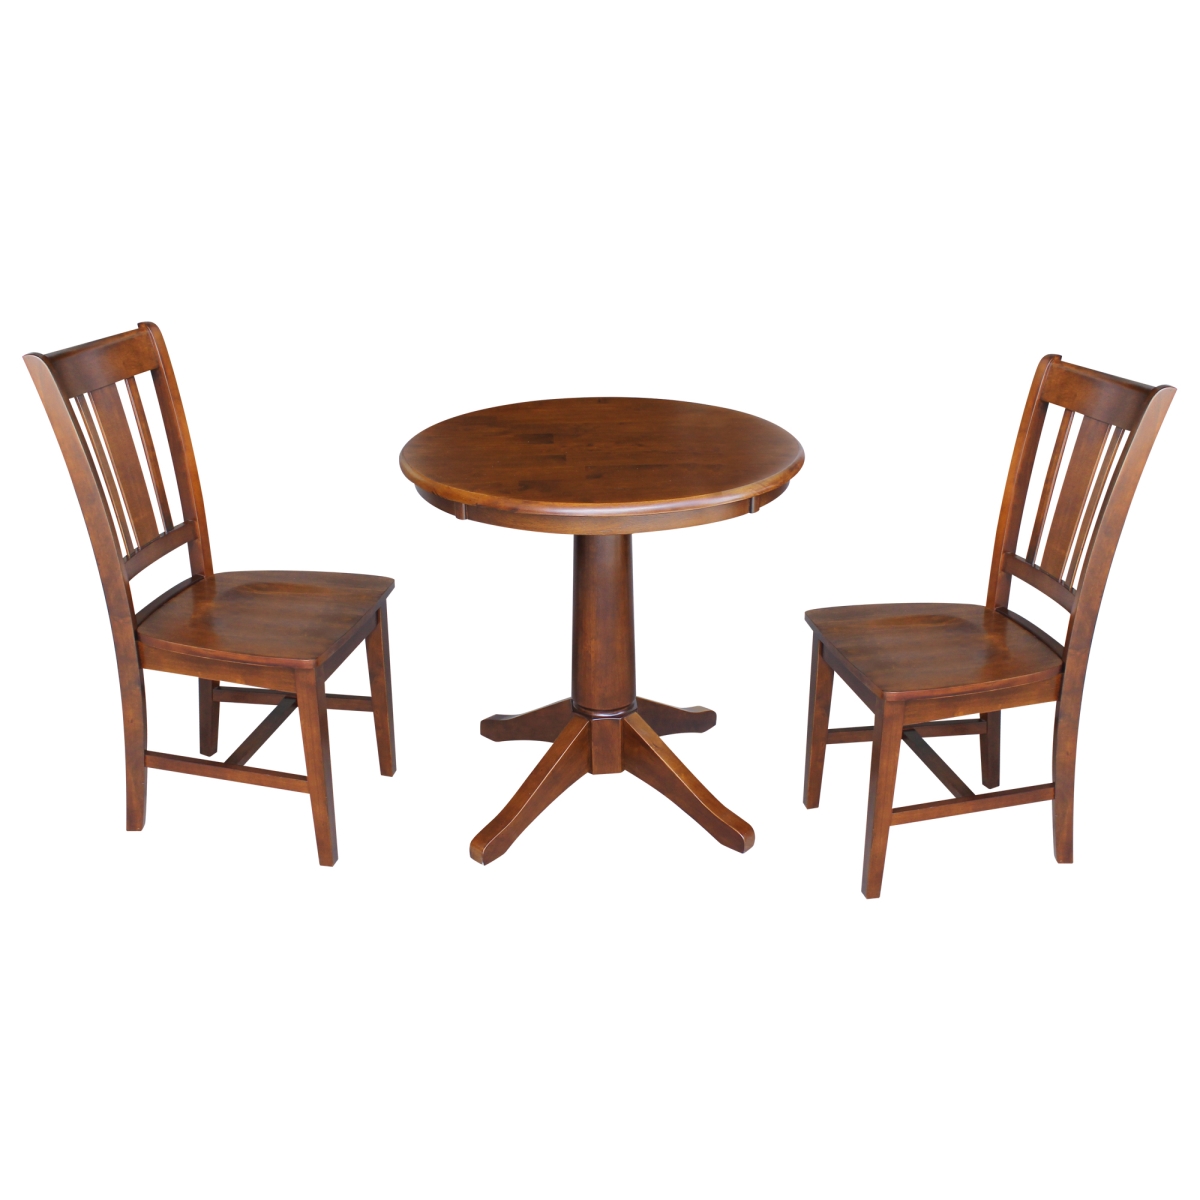 K581-30rt-27b-c10-2 30 In. Round Top Pedestal Table With 2 Chairs, Espresso - 3 Piece